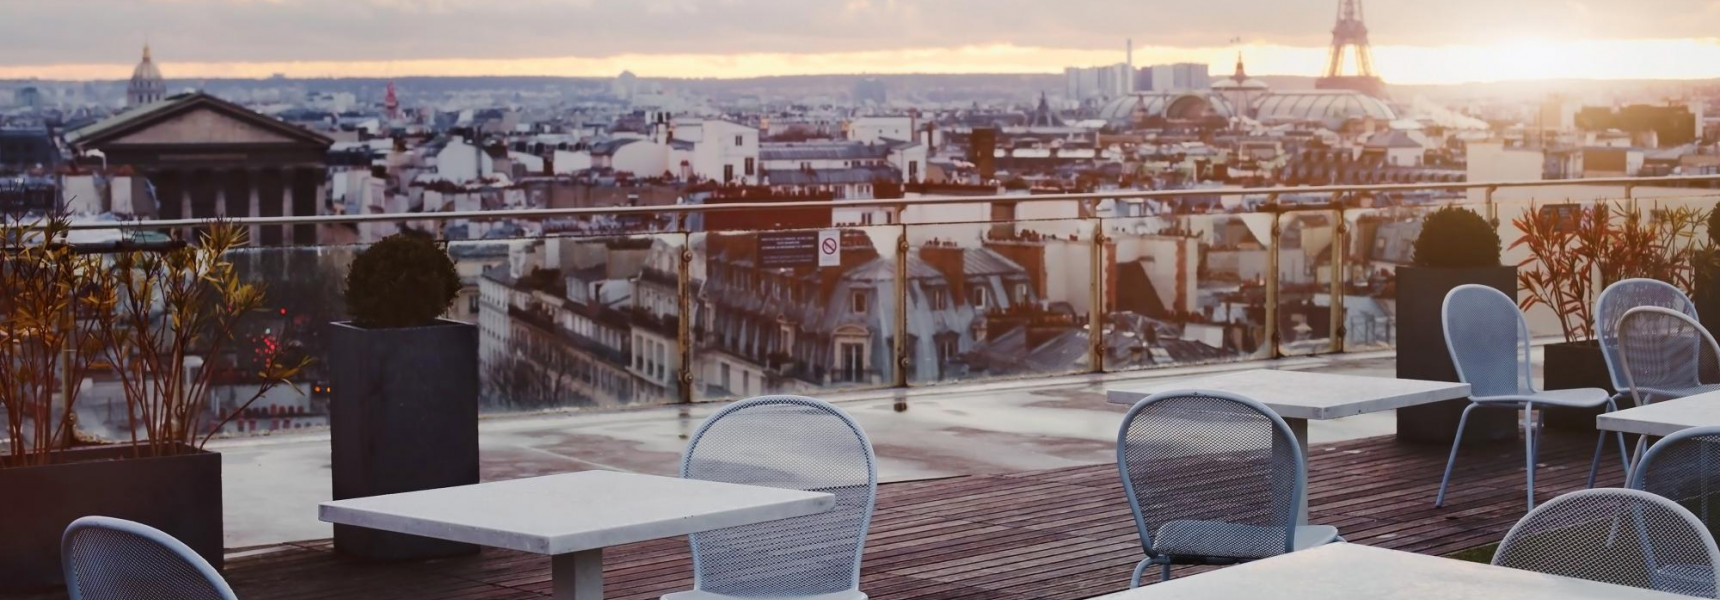 2 of the Best Restaurants in Paris with a View